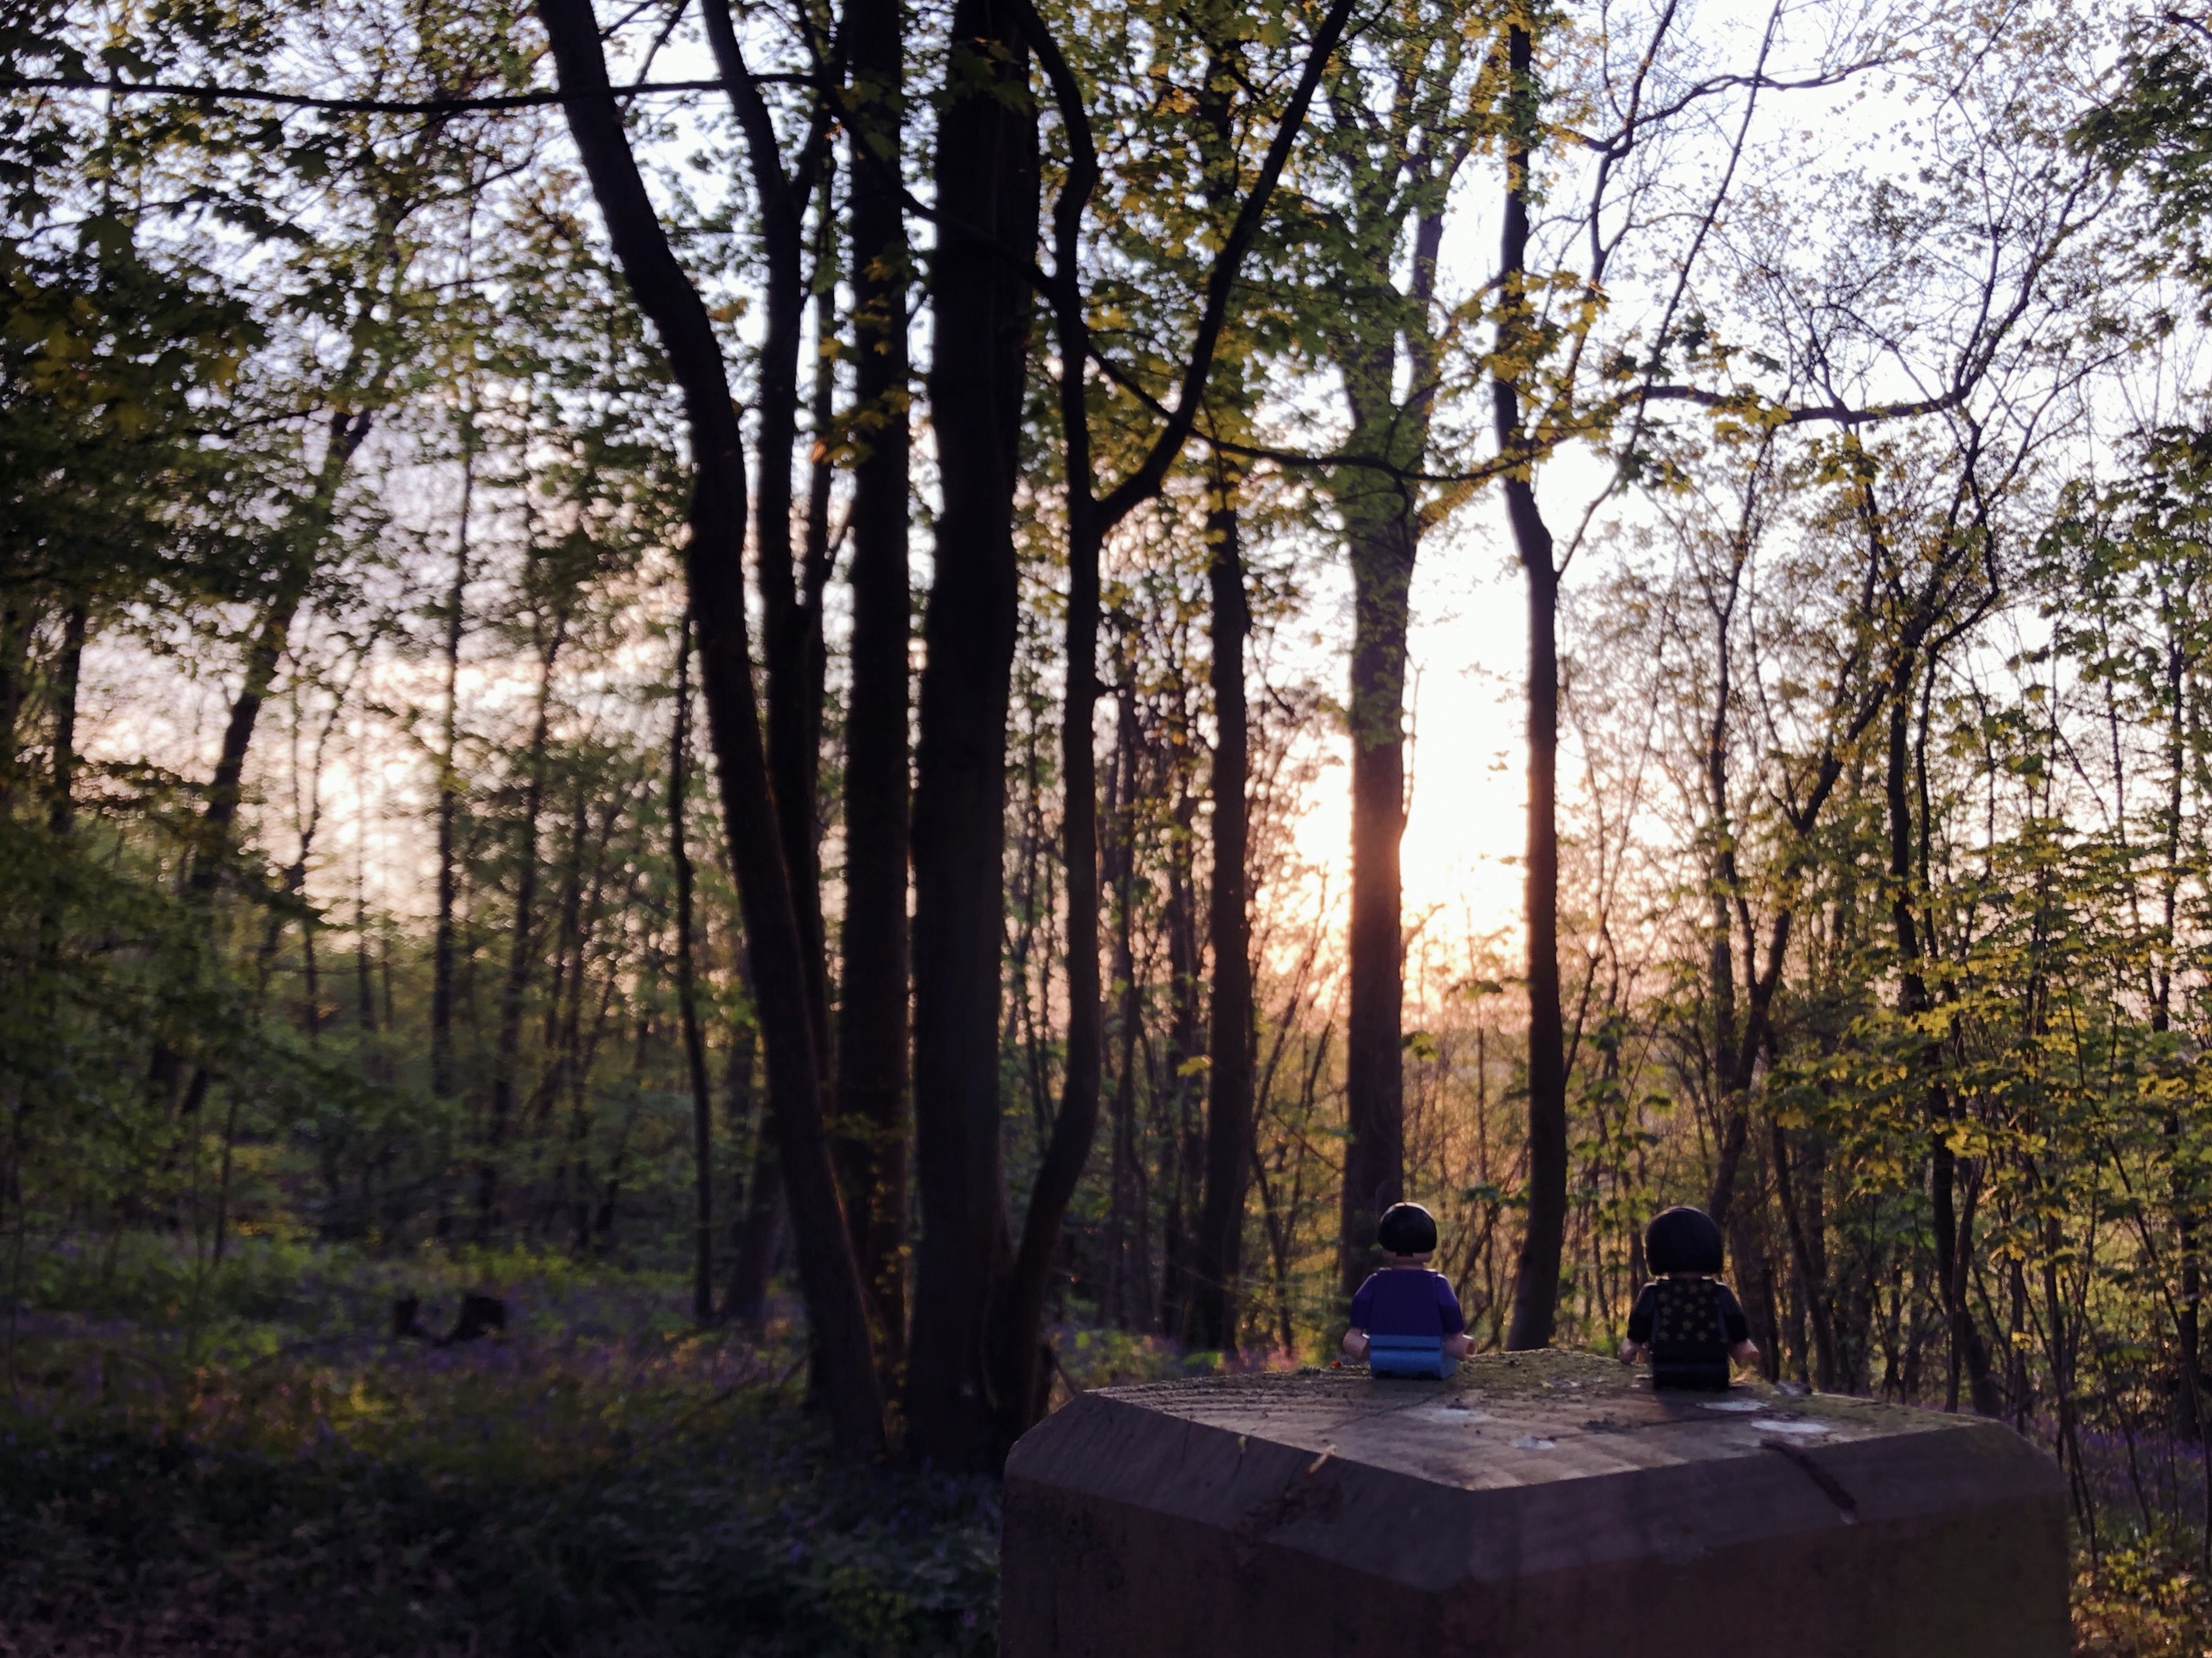 The same lego couple sat on a wooden pedestal, looking onto the background of the woods during sunset. The dulled sun filters through the trees.